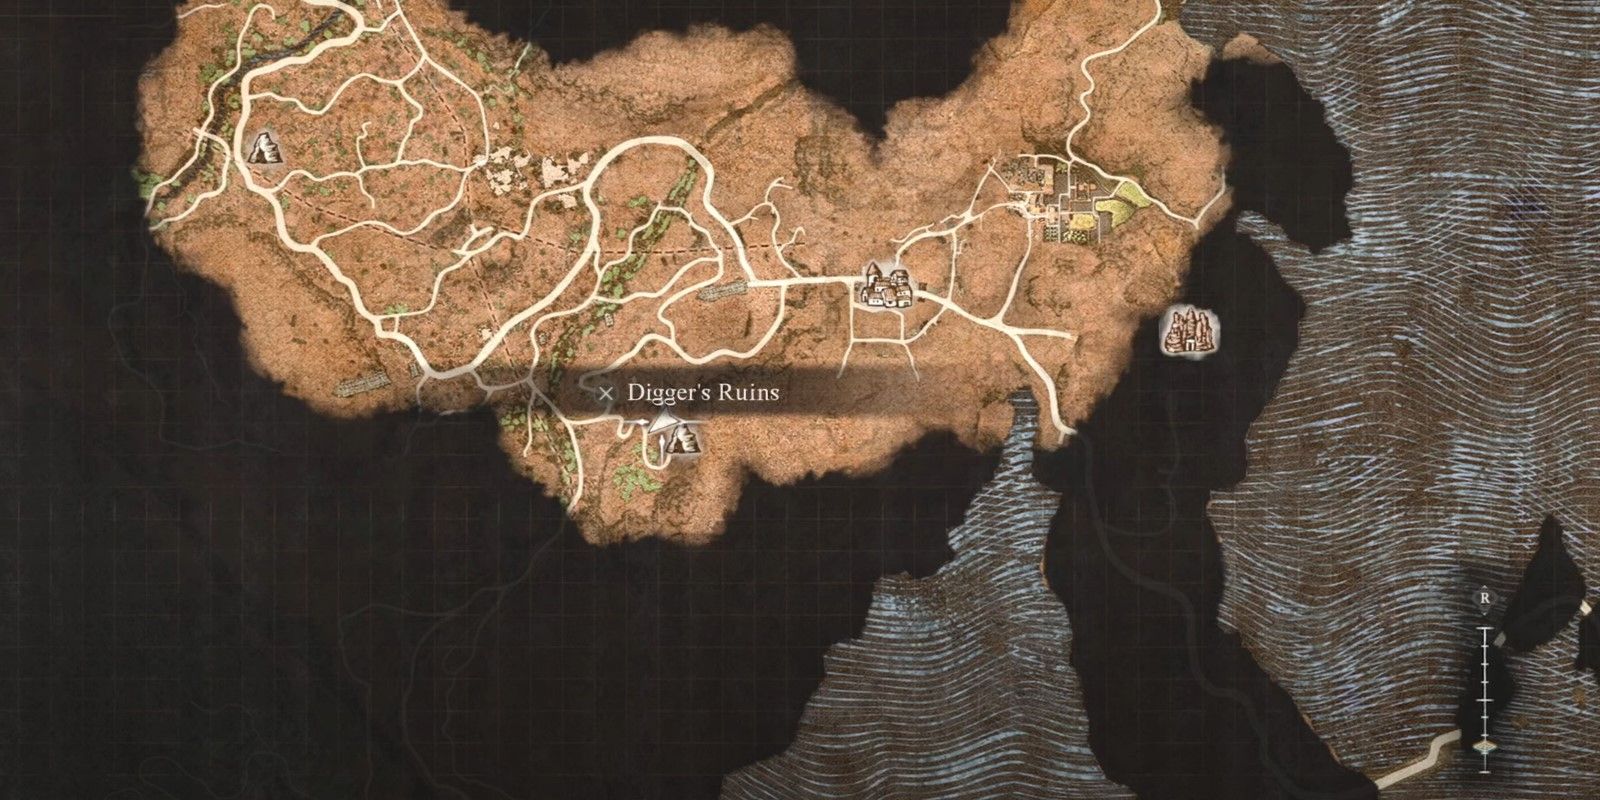 The Dragon's Dogma 2 character is showing the location of Digger's Ruins just southwest from Bakbatthal.